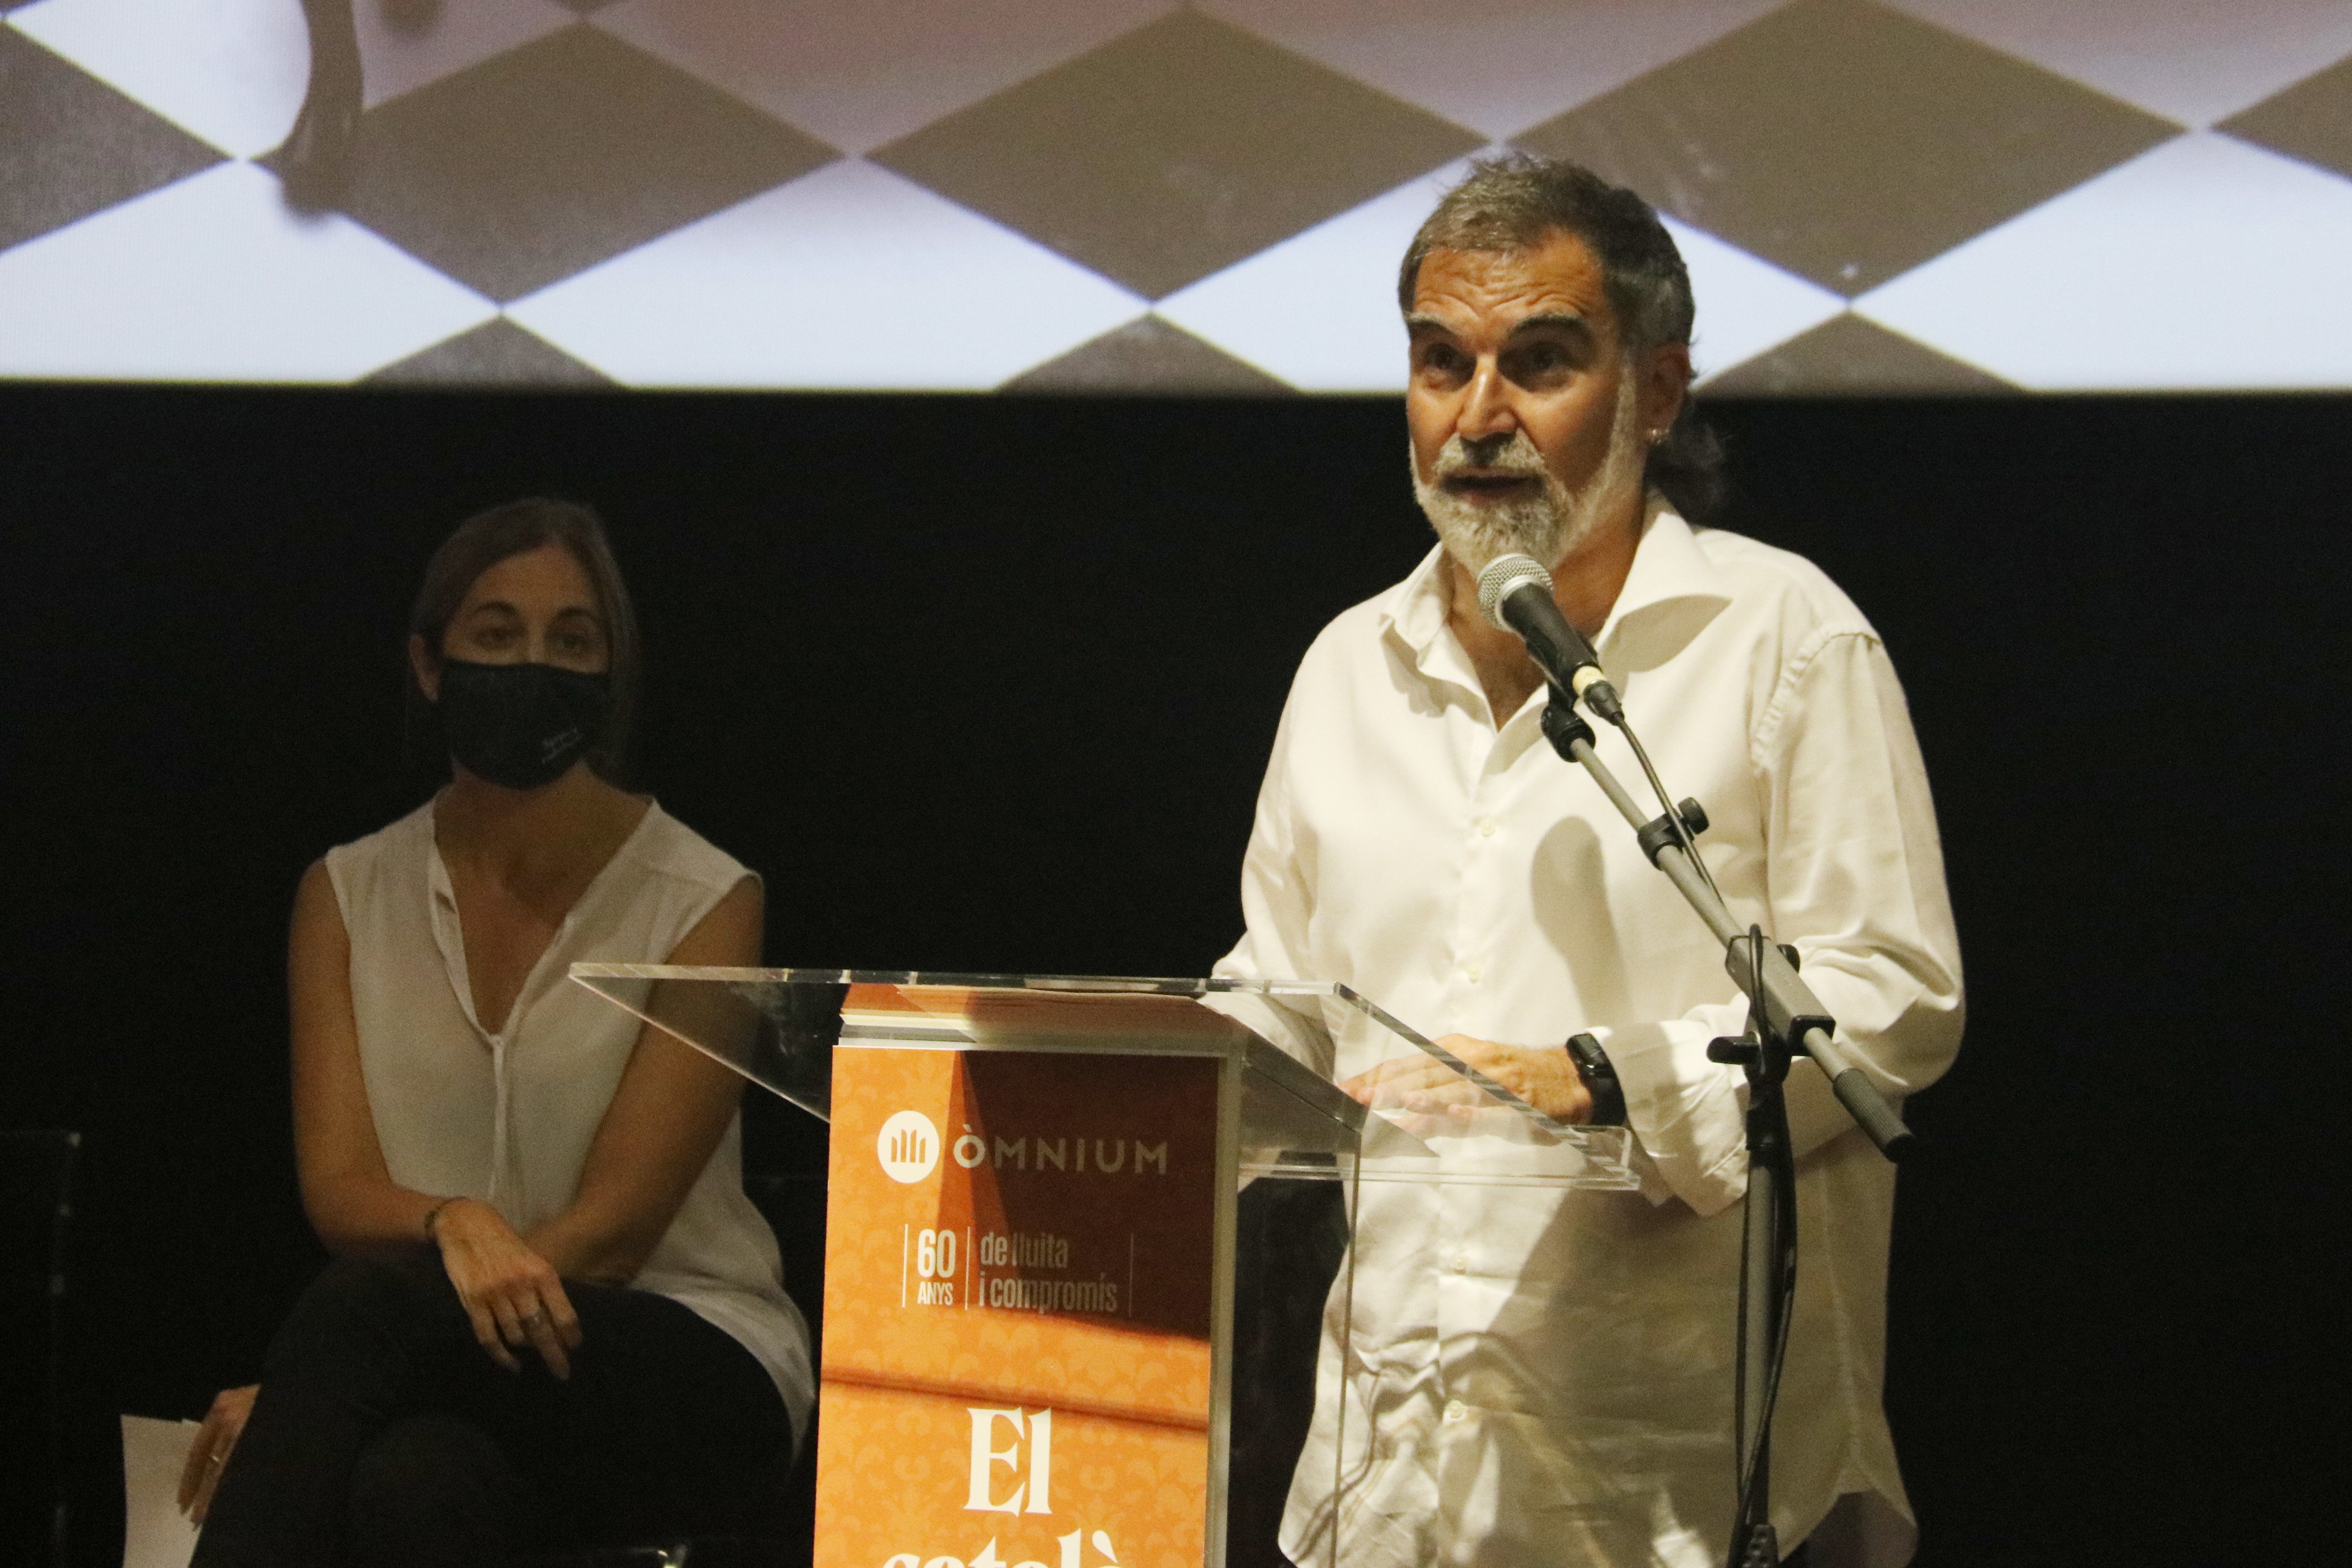 "Catalan is Yours": Òmnium launches initiatives to re-energize the Catalan language